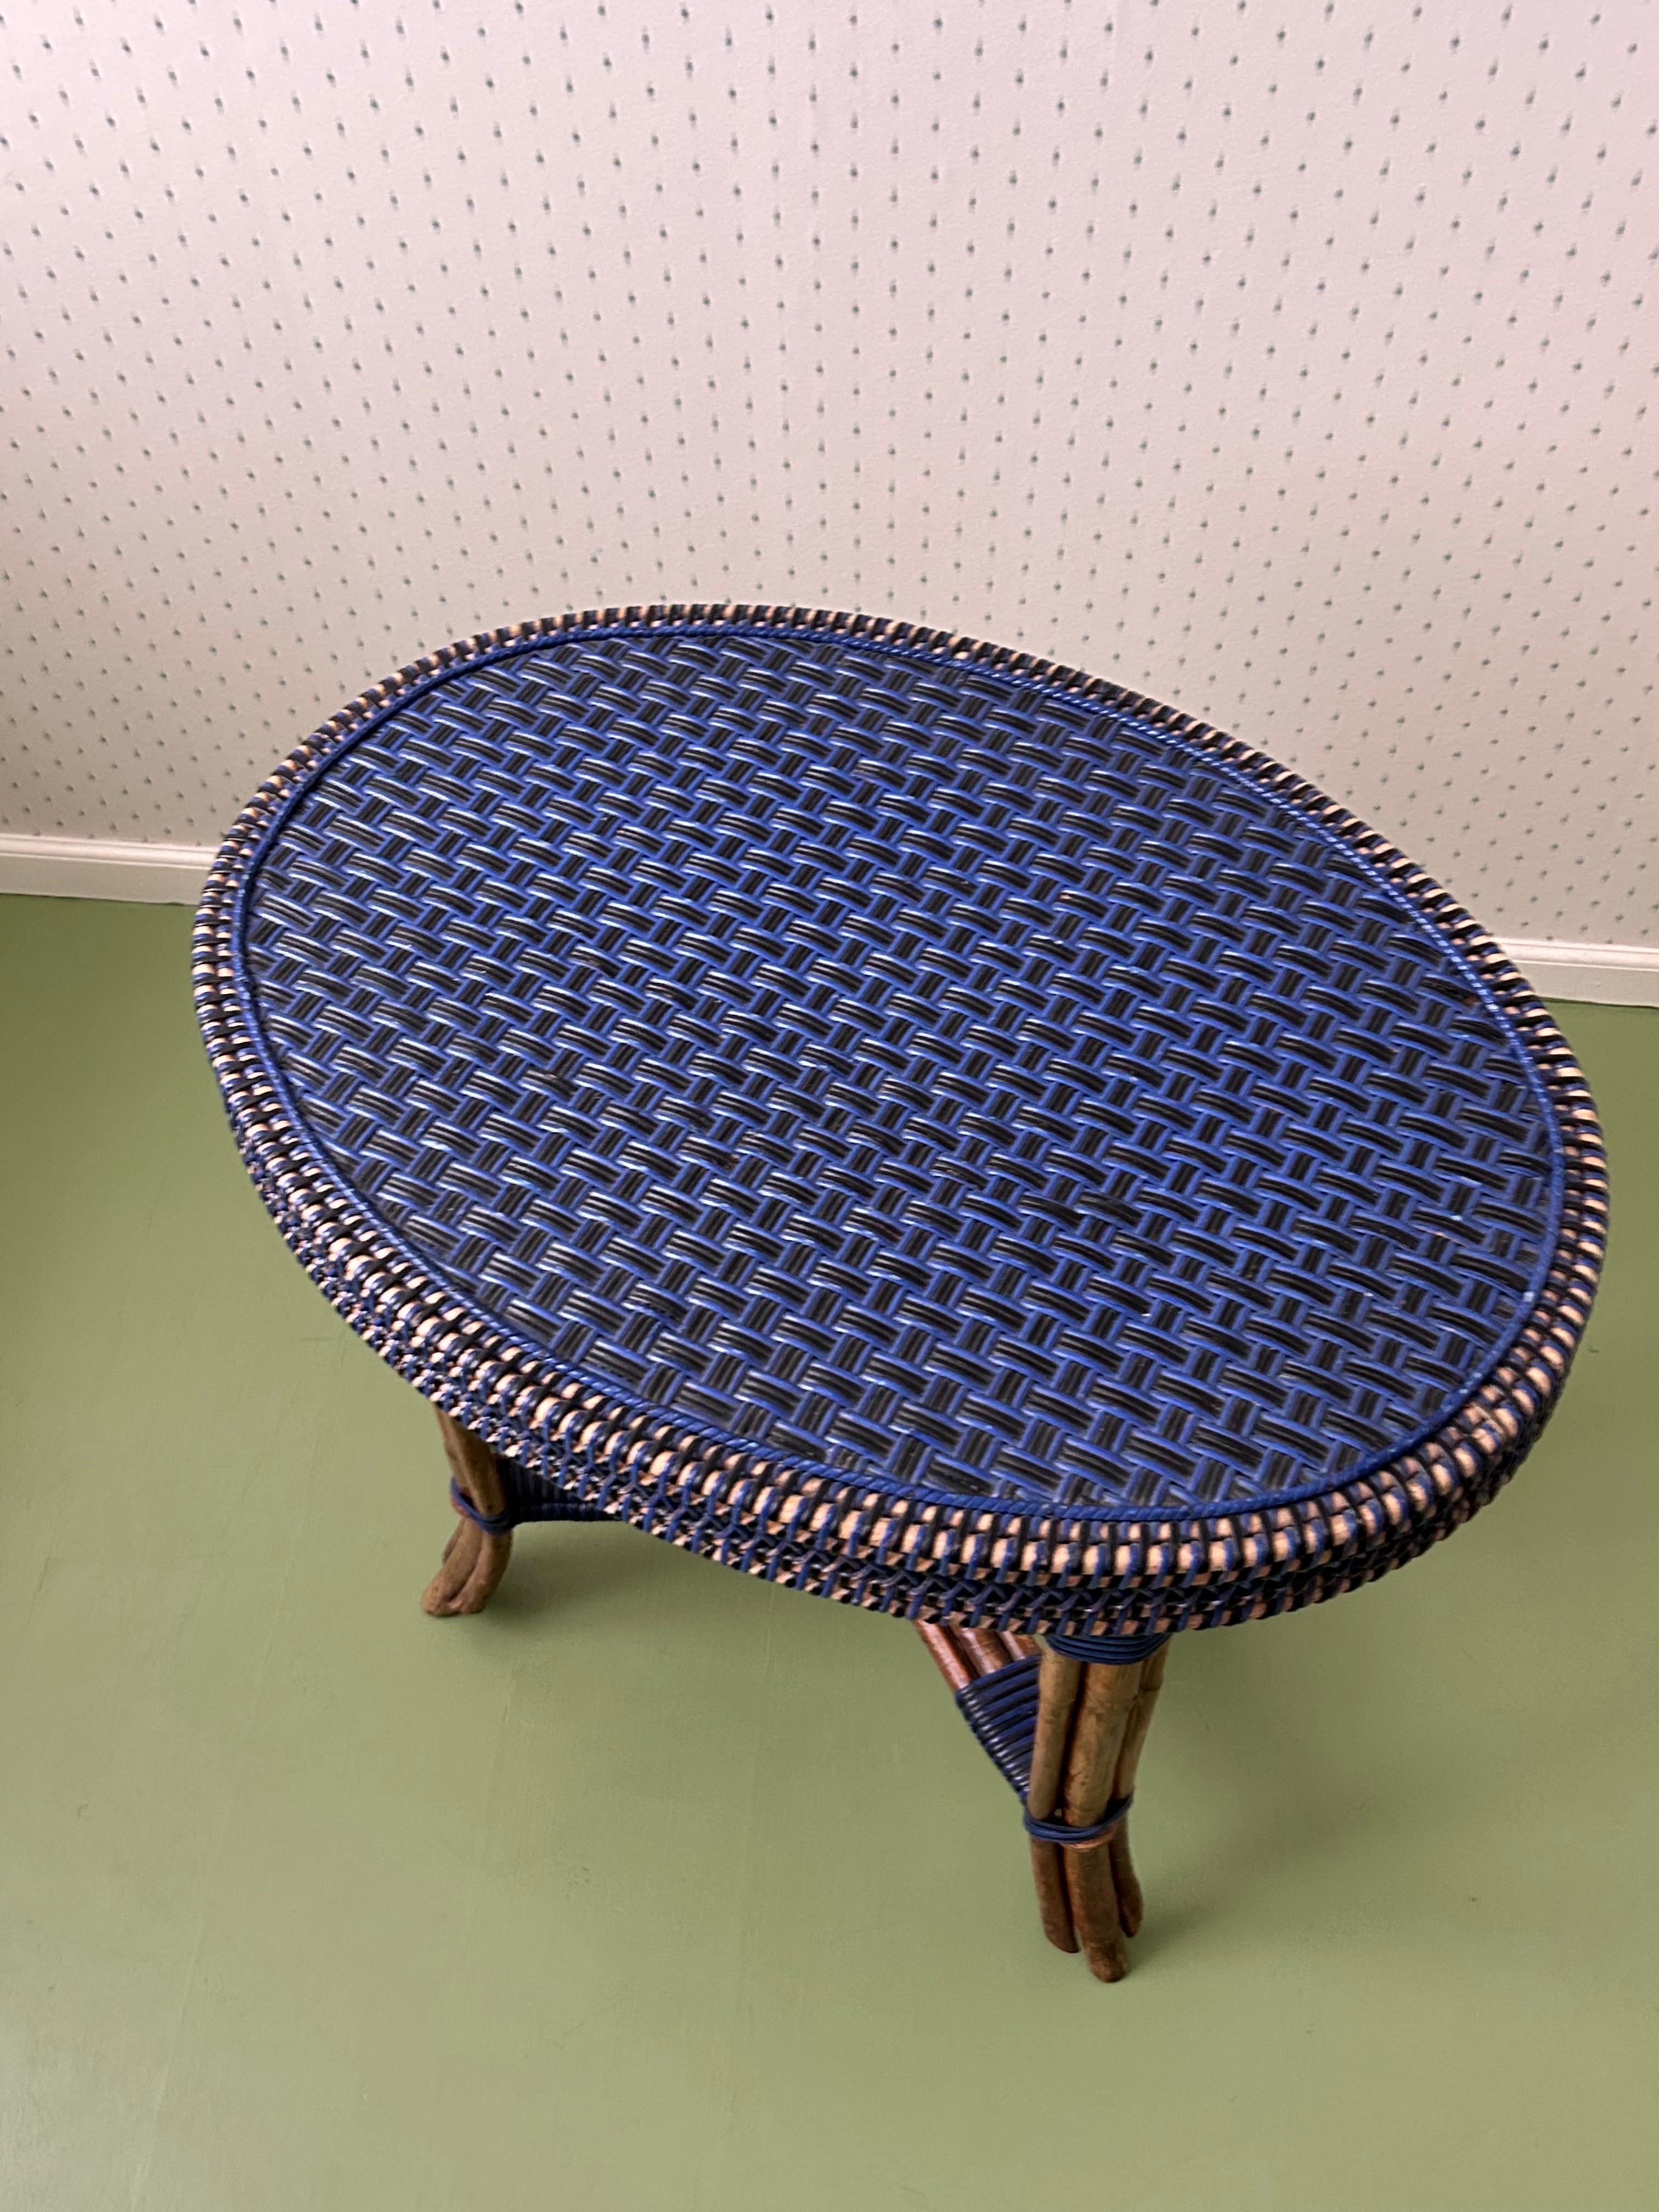 Vintage Rattan Table in Black and Blue, France, Early 20th Century For Sale 4